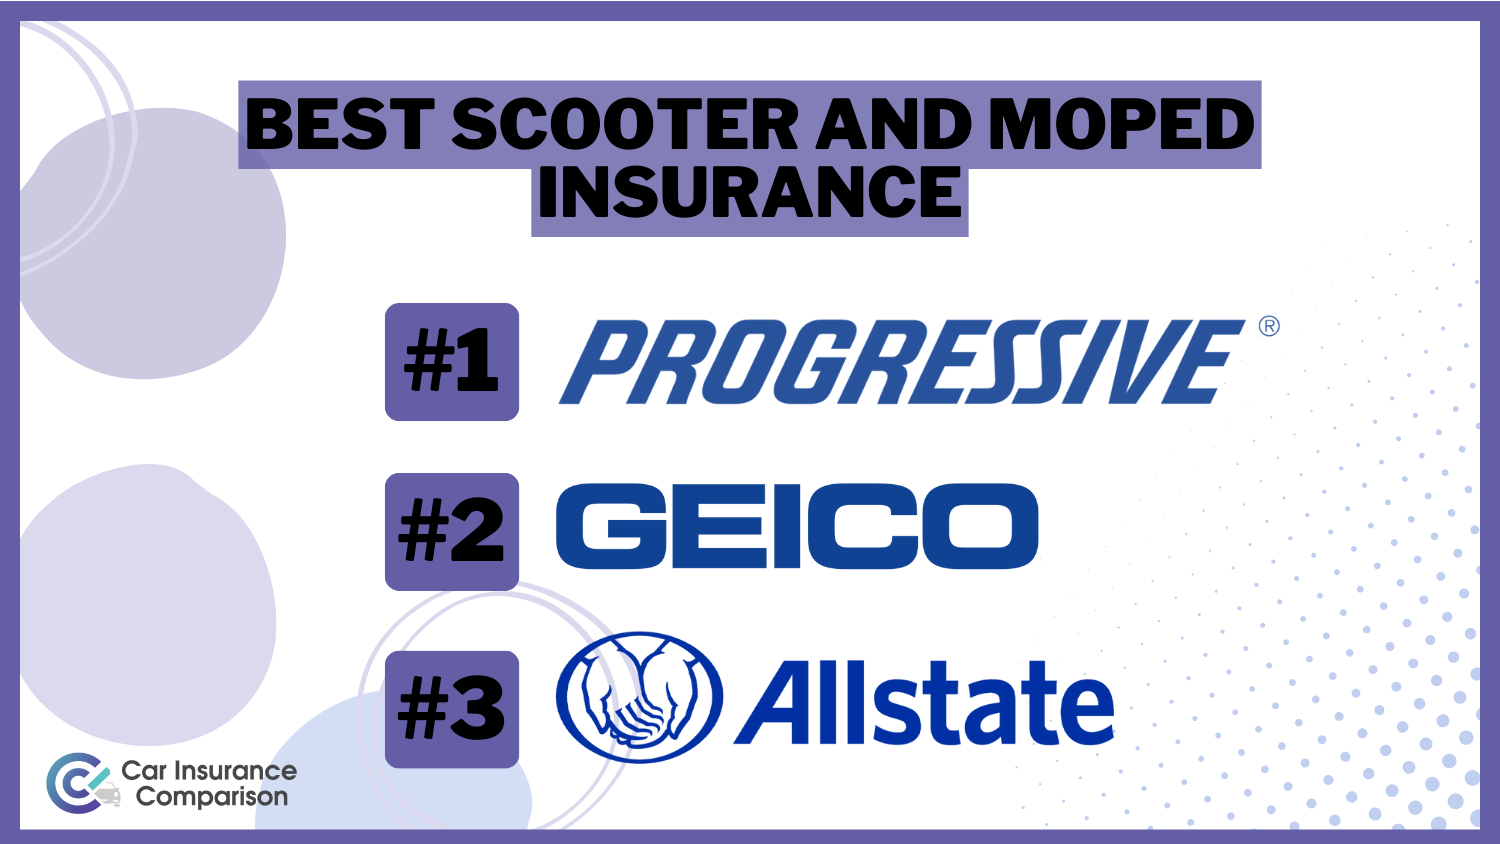 3 Best Scooter and Moped Insurance: Progressive, Geico, and Allstate